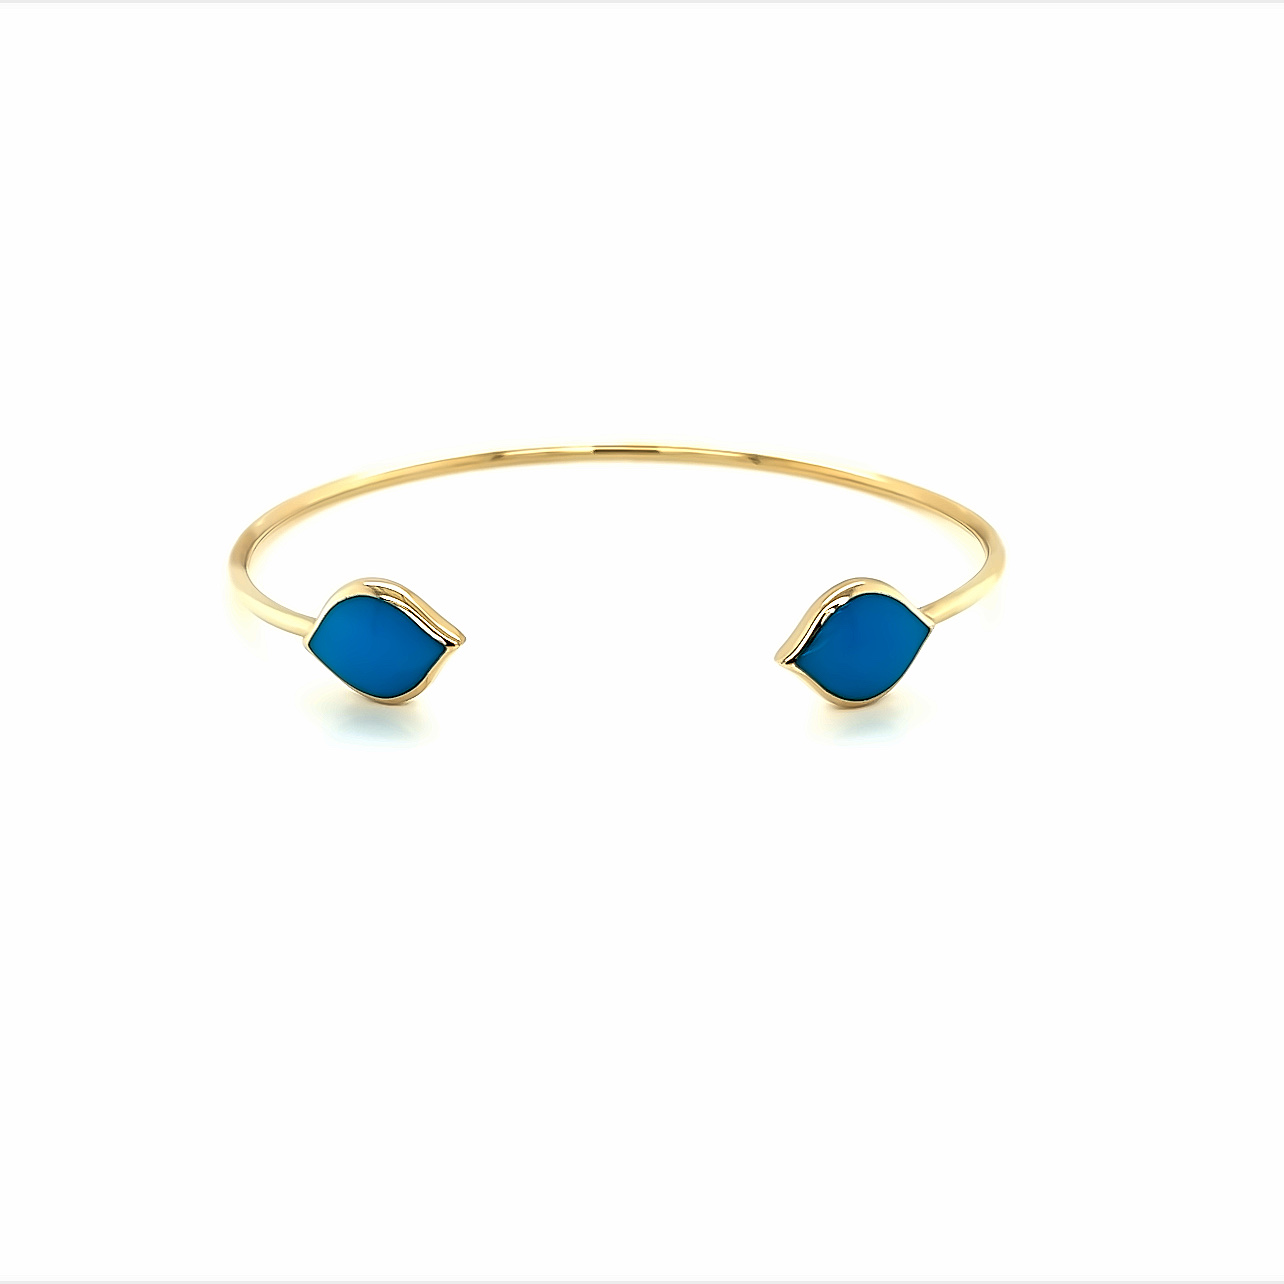 14 Karat yellow gold Cuff Bracelet with turquoise inlay